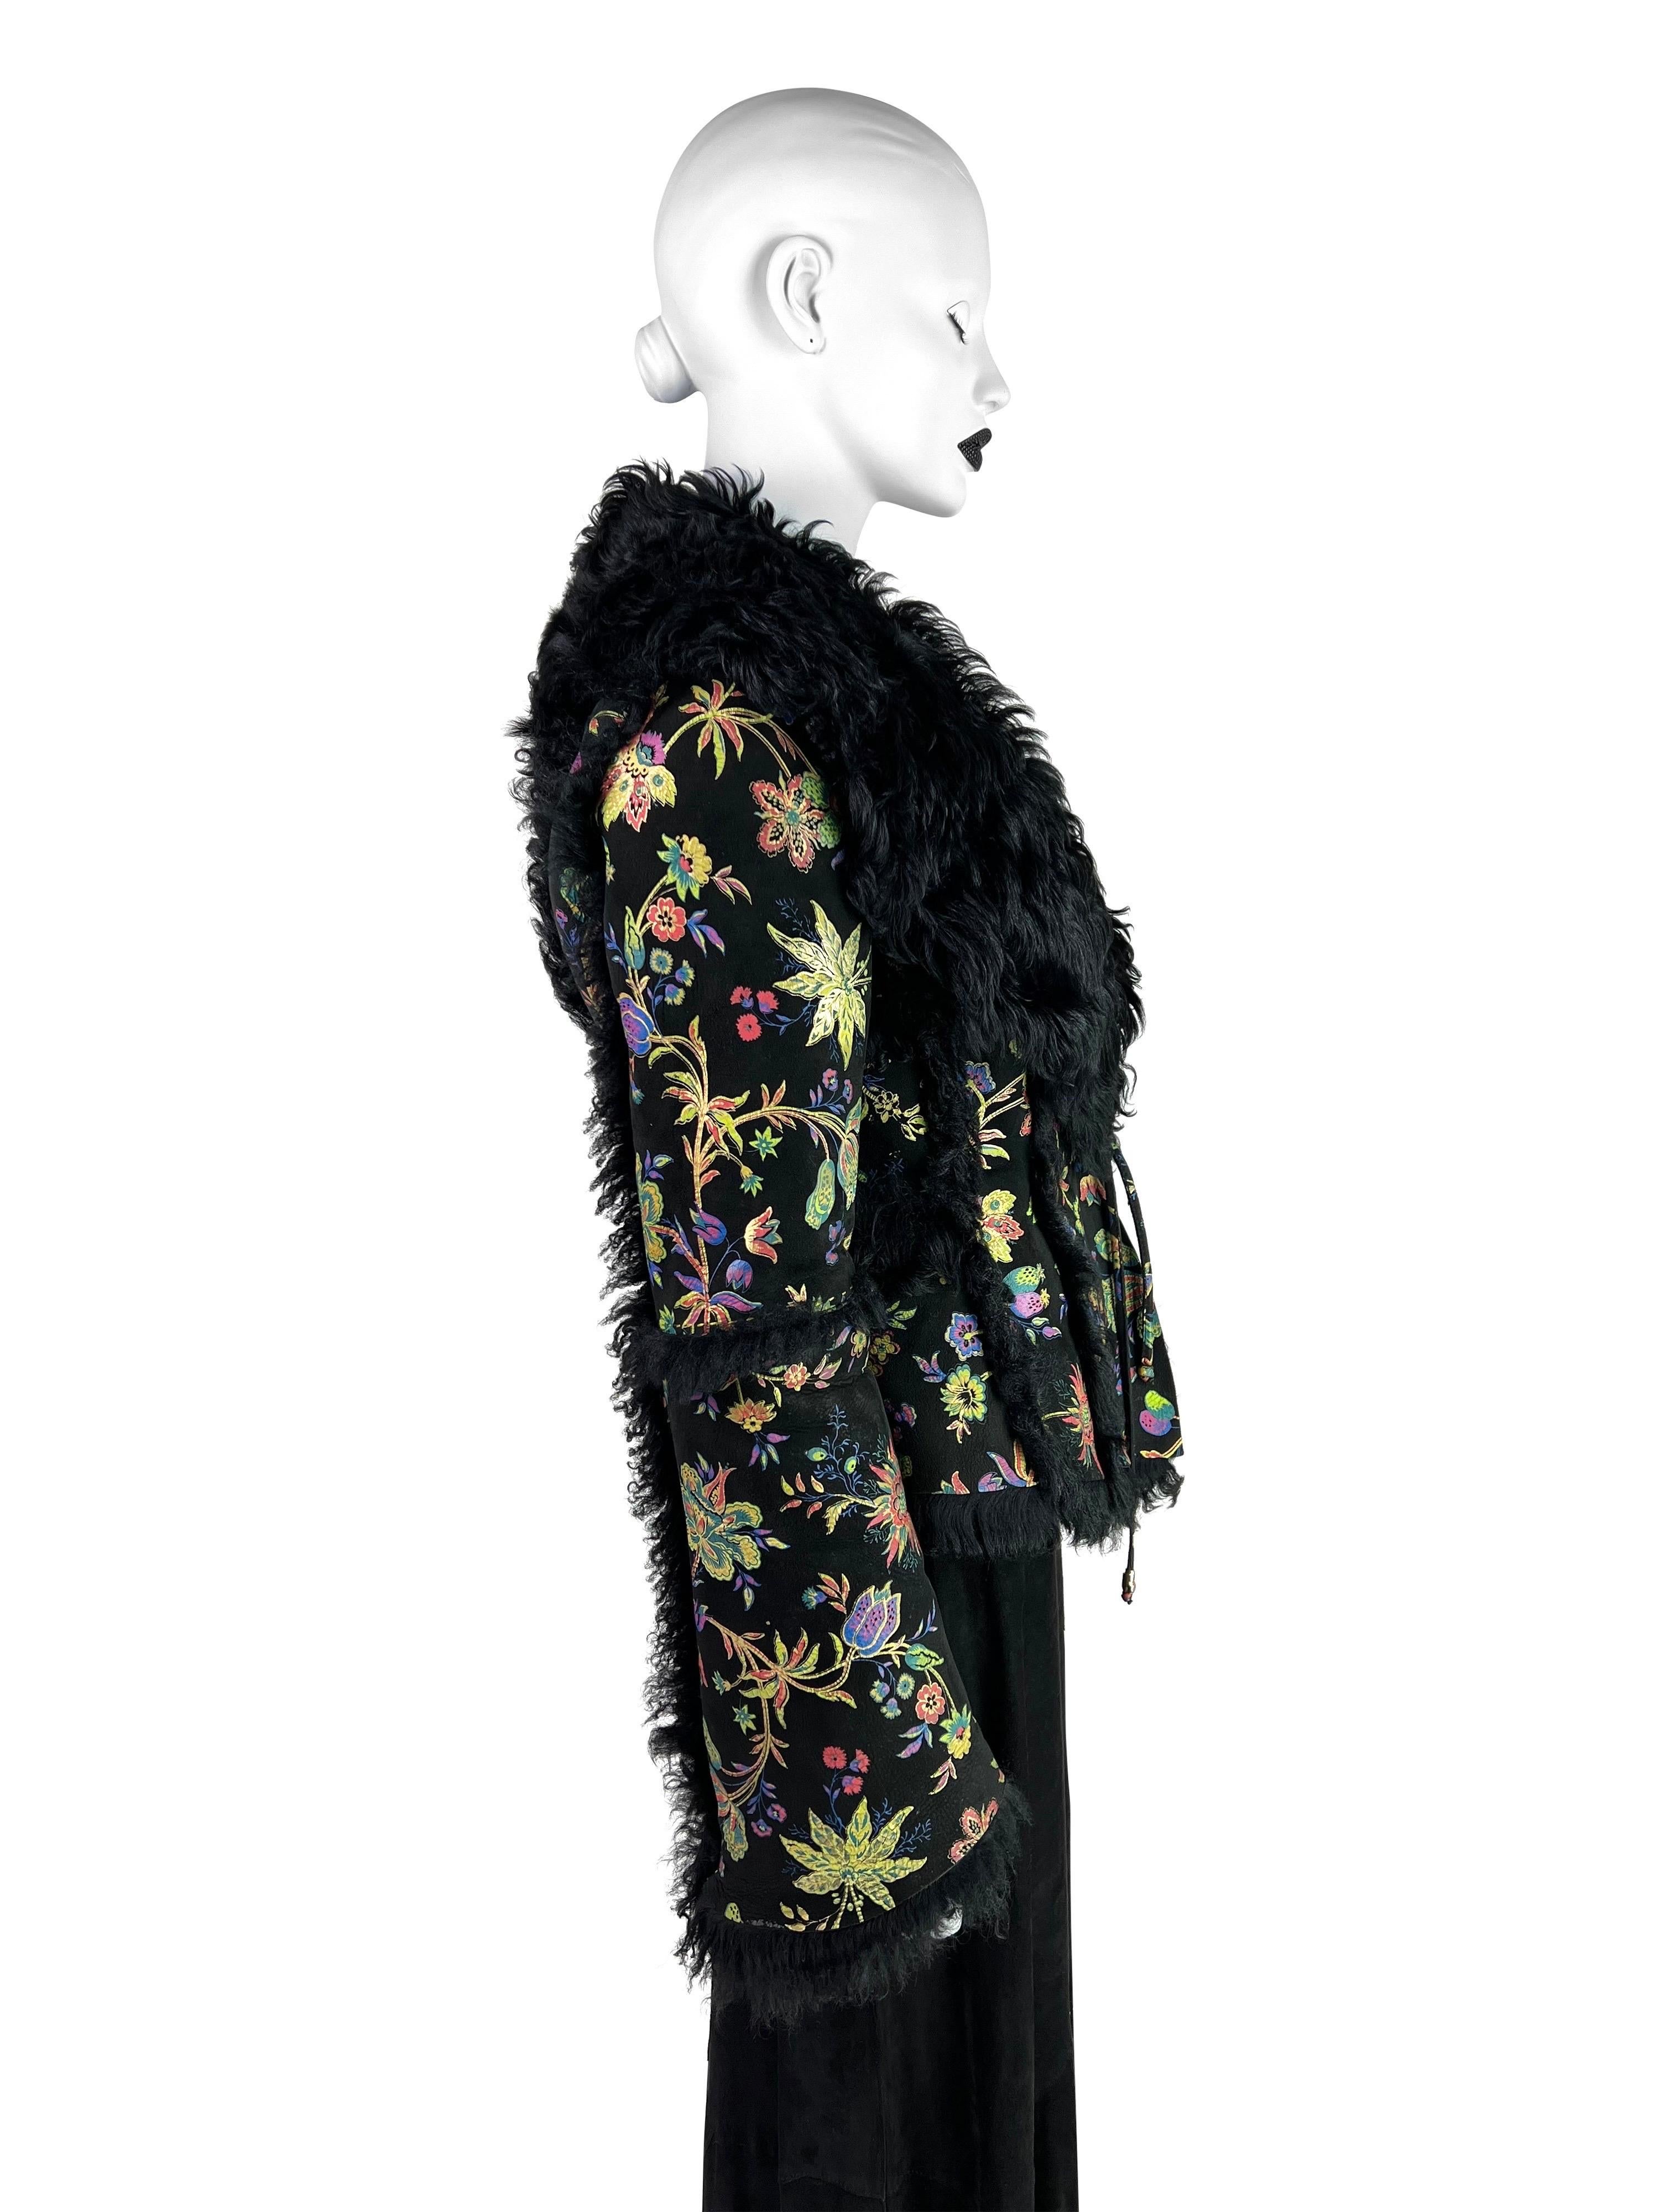 Roberto Cavalli Fall 1999 Hand-painted Flower Shearling Jacket For Sale 3